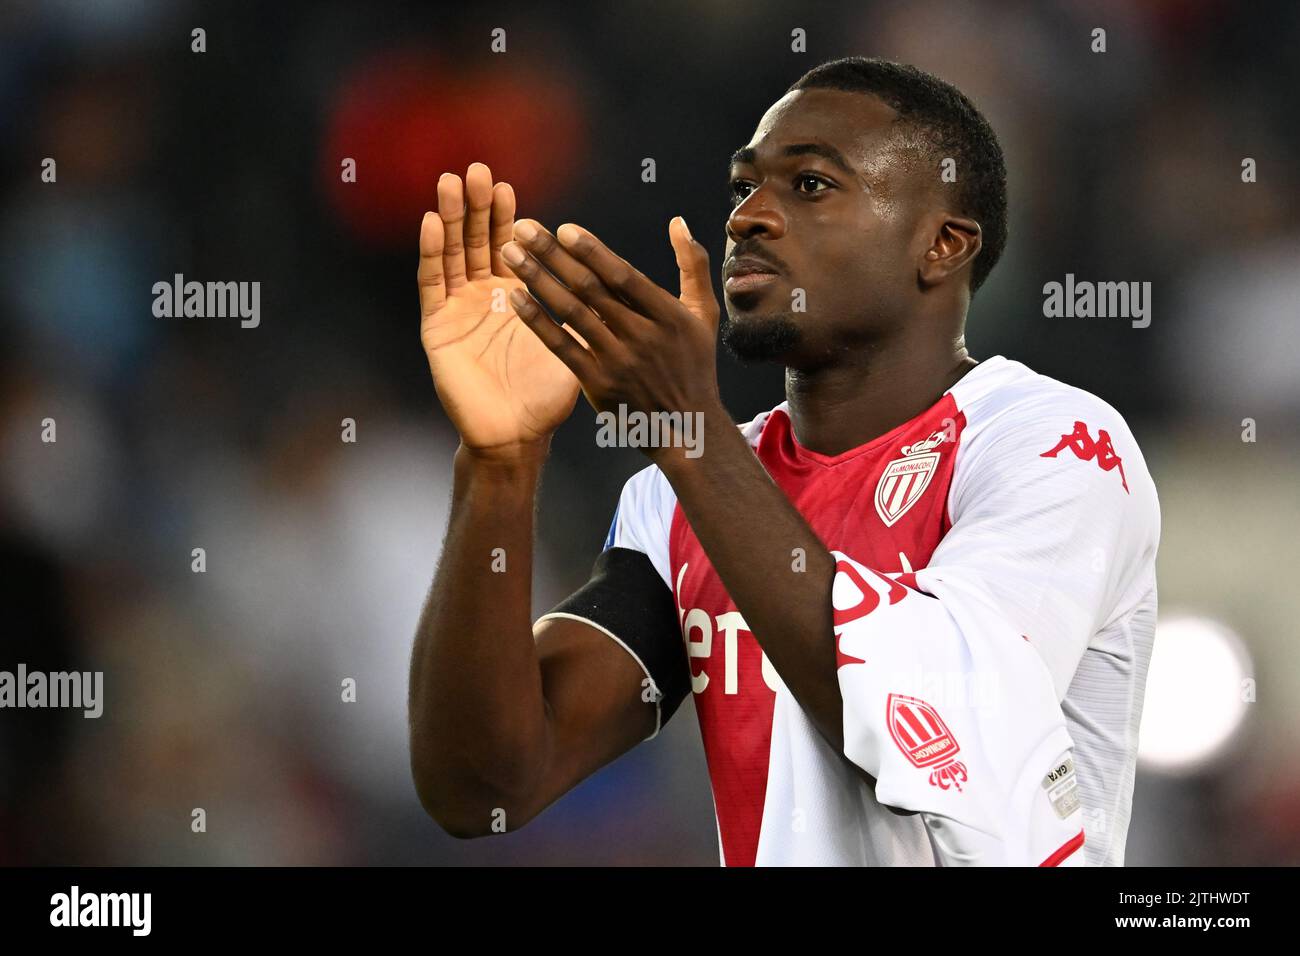 BUDAPEST, HUNGARY - OCTOBER 27: Youssouf Fofana of AS Monaco controls the  ball during the UEFA Europa League group H match between Ferencvarosi TC  and AS Monaco at Ferencvaros Stadium on October